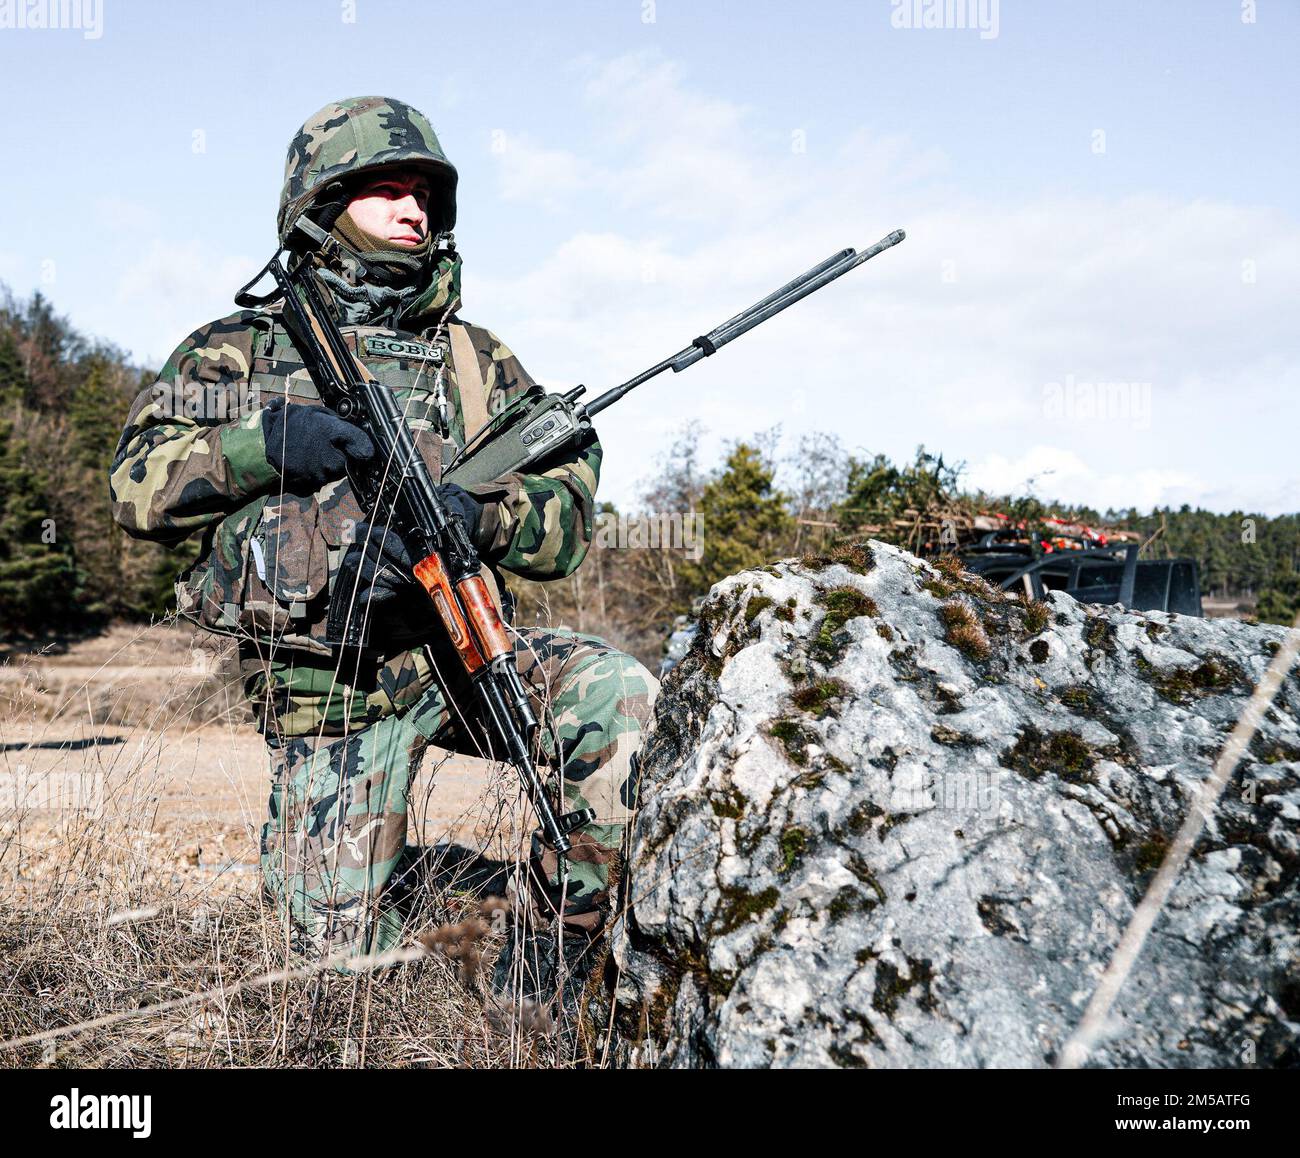 A Moldavian soldier conducts a joint patrol during KFOR 30 at the Hohenfels Training Area in Germany, Feb. 17, 2022. KFOR 30 is a multinational training event conducted to prepare units for their deployment to the Kosovo Regional Command East. Stock Photo